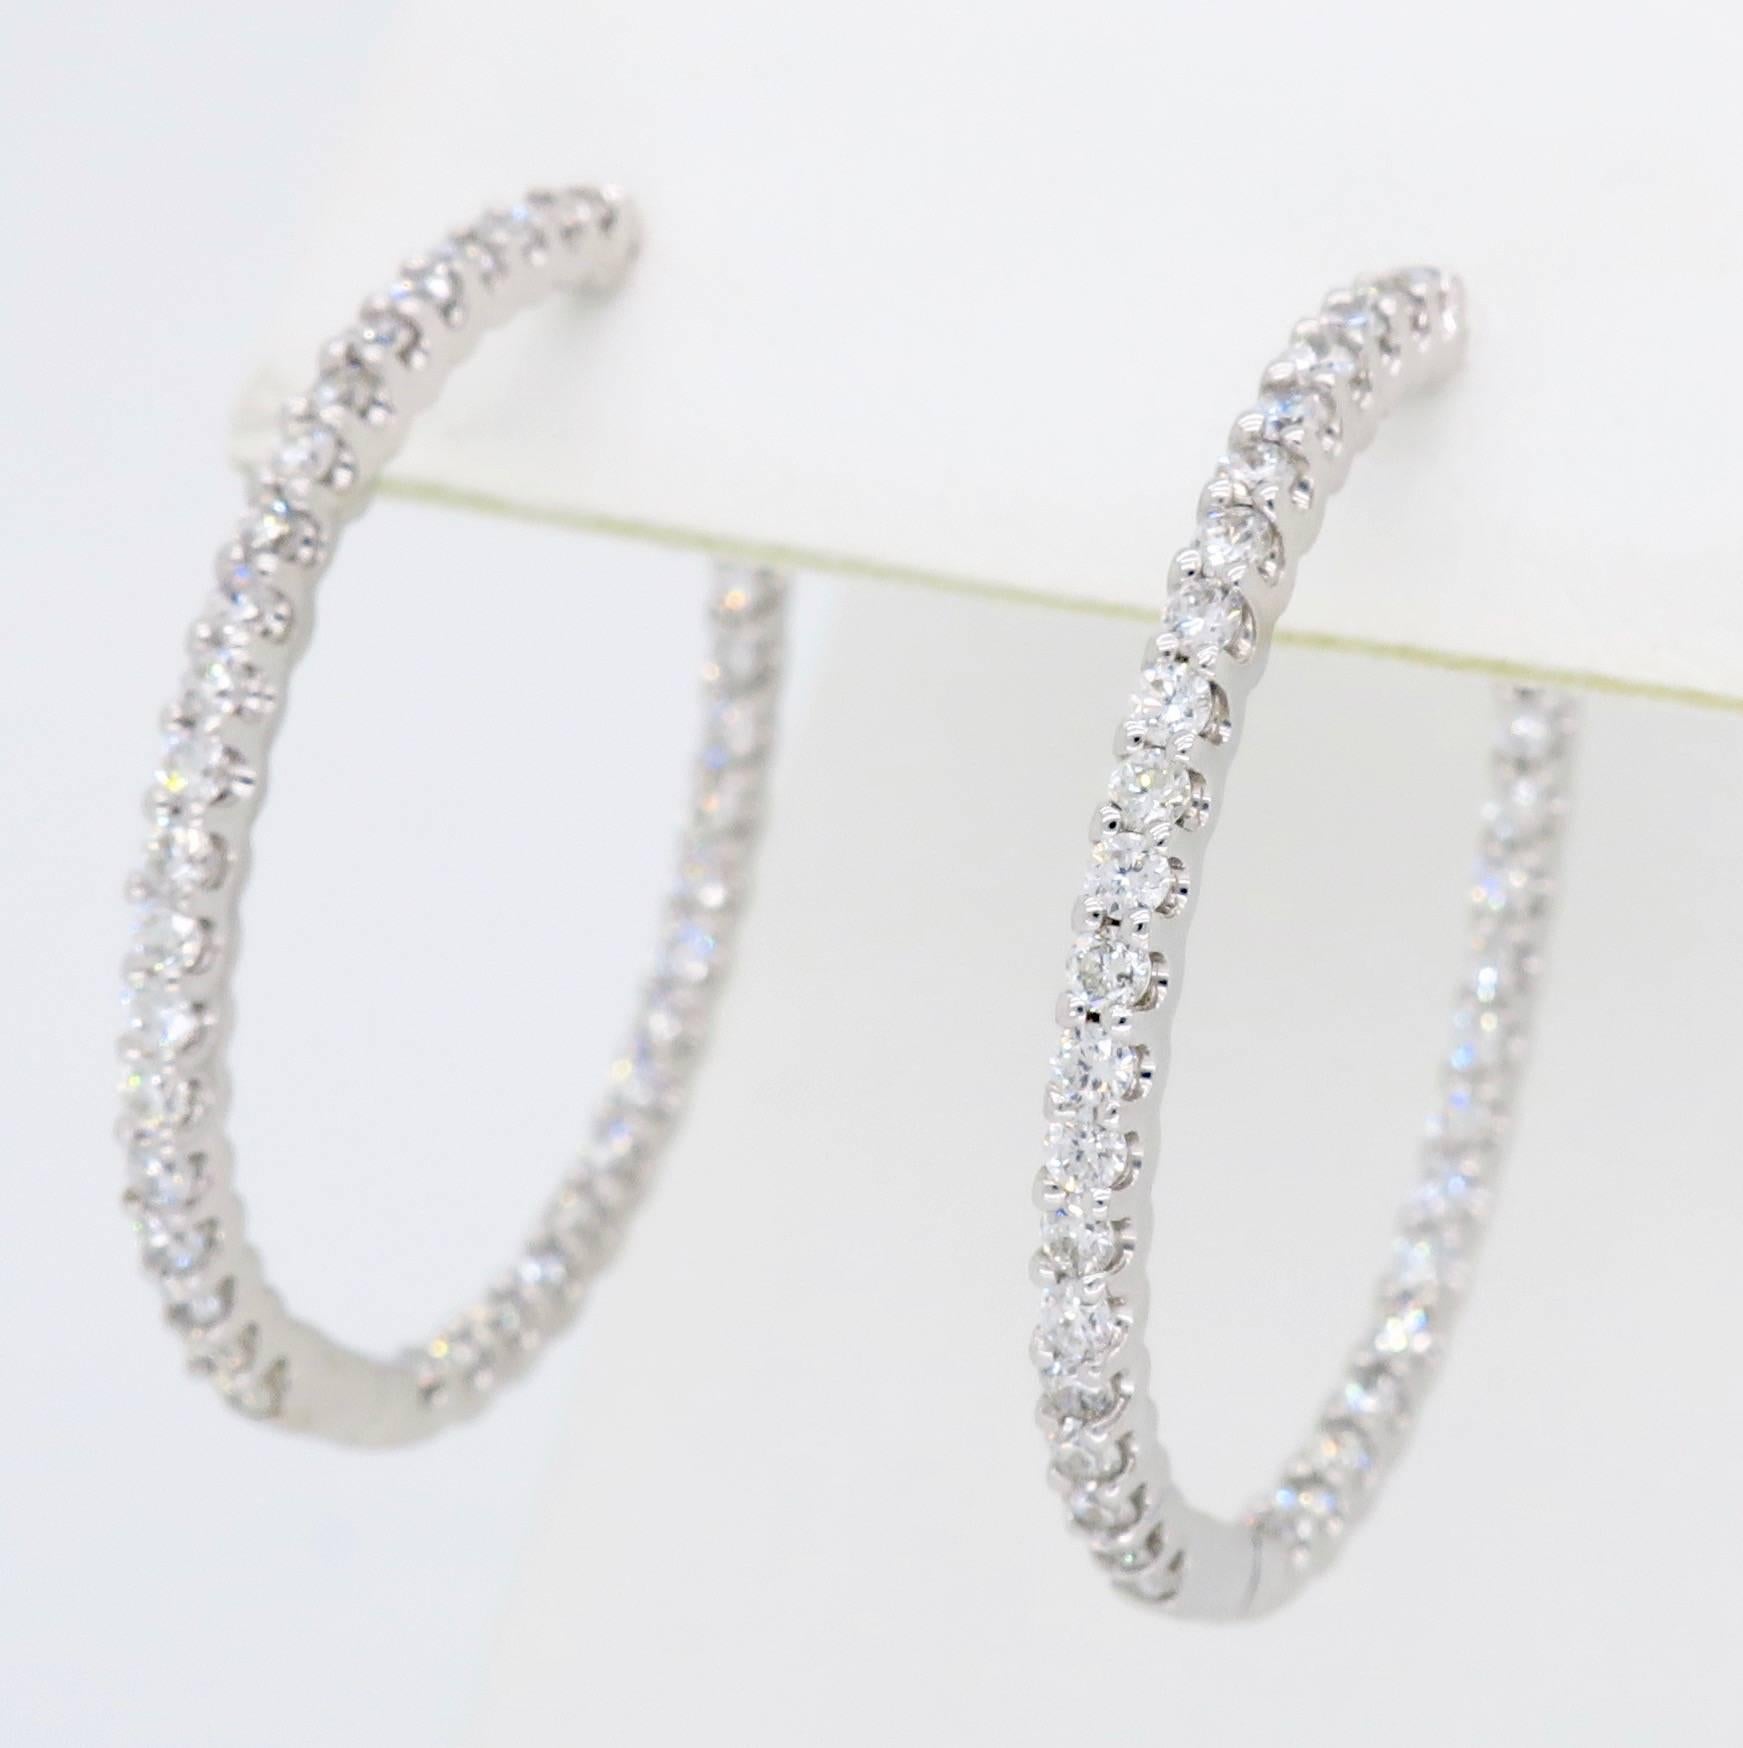 These beautiful oval shaped inside out style hoops feature 1.18CTW of Round Brilliant Cut Diamonds.

Diamond Carat Weight: 1.18CTW
Diamond Cut: 74 Round Brilliant Cut Diamonds
Color: Average G-J
Clarity: Average VS
Metal: 18K White